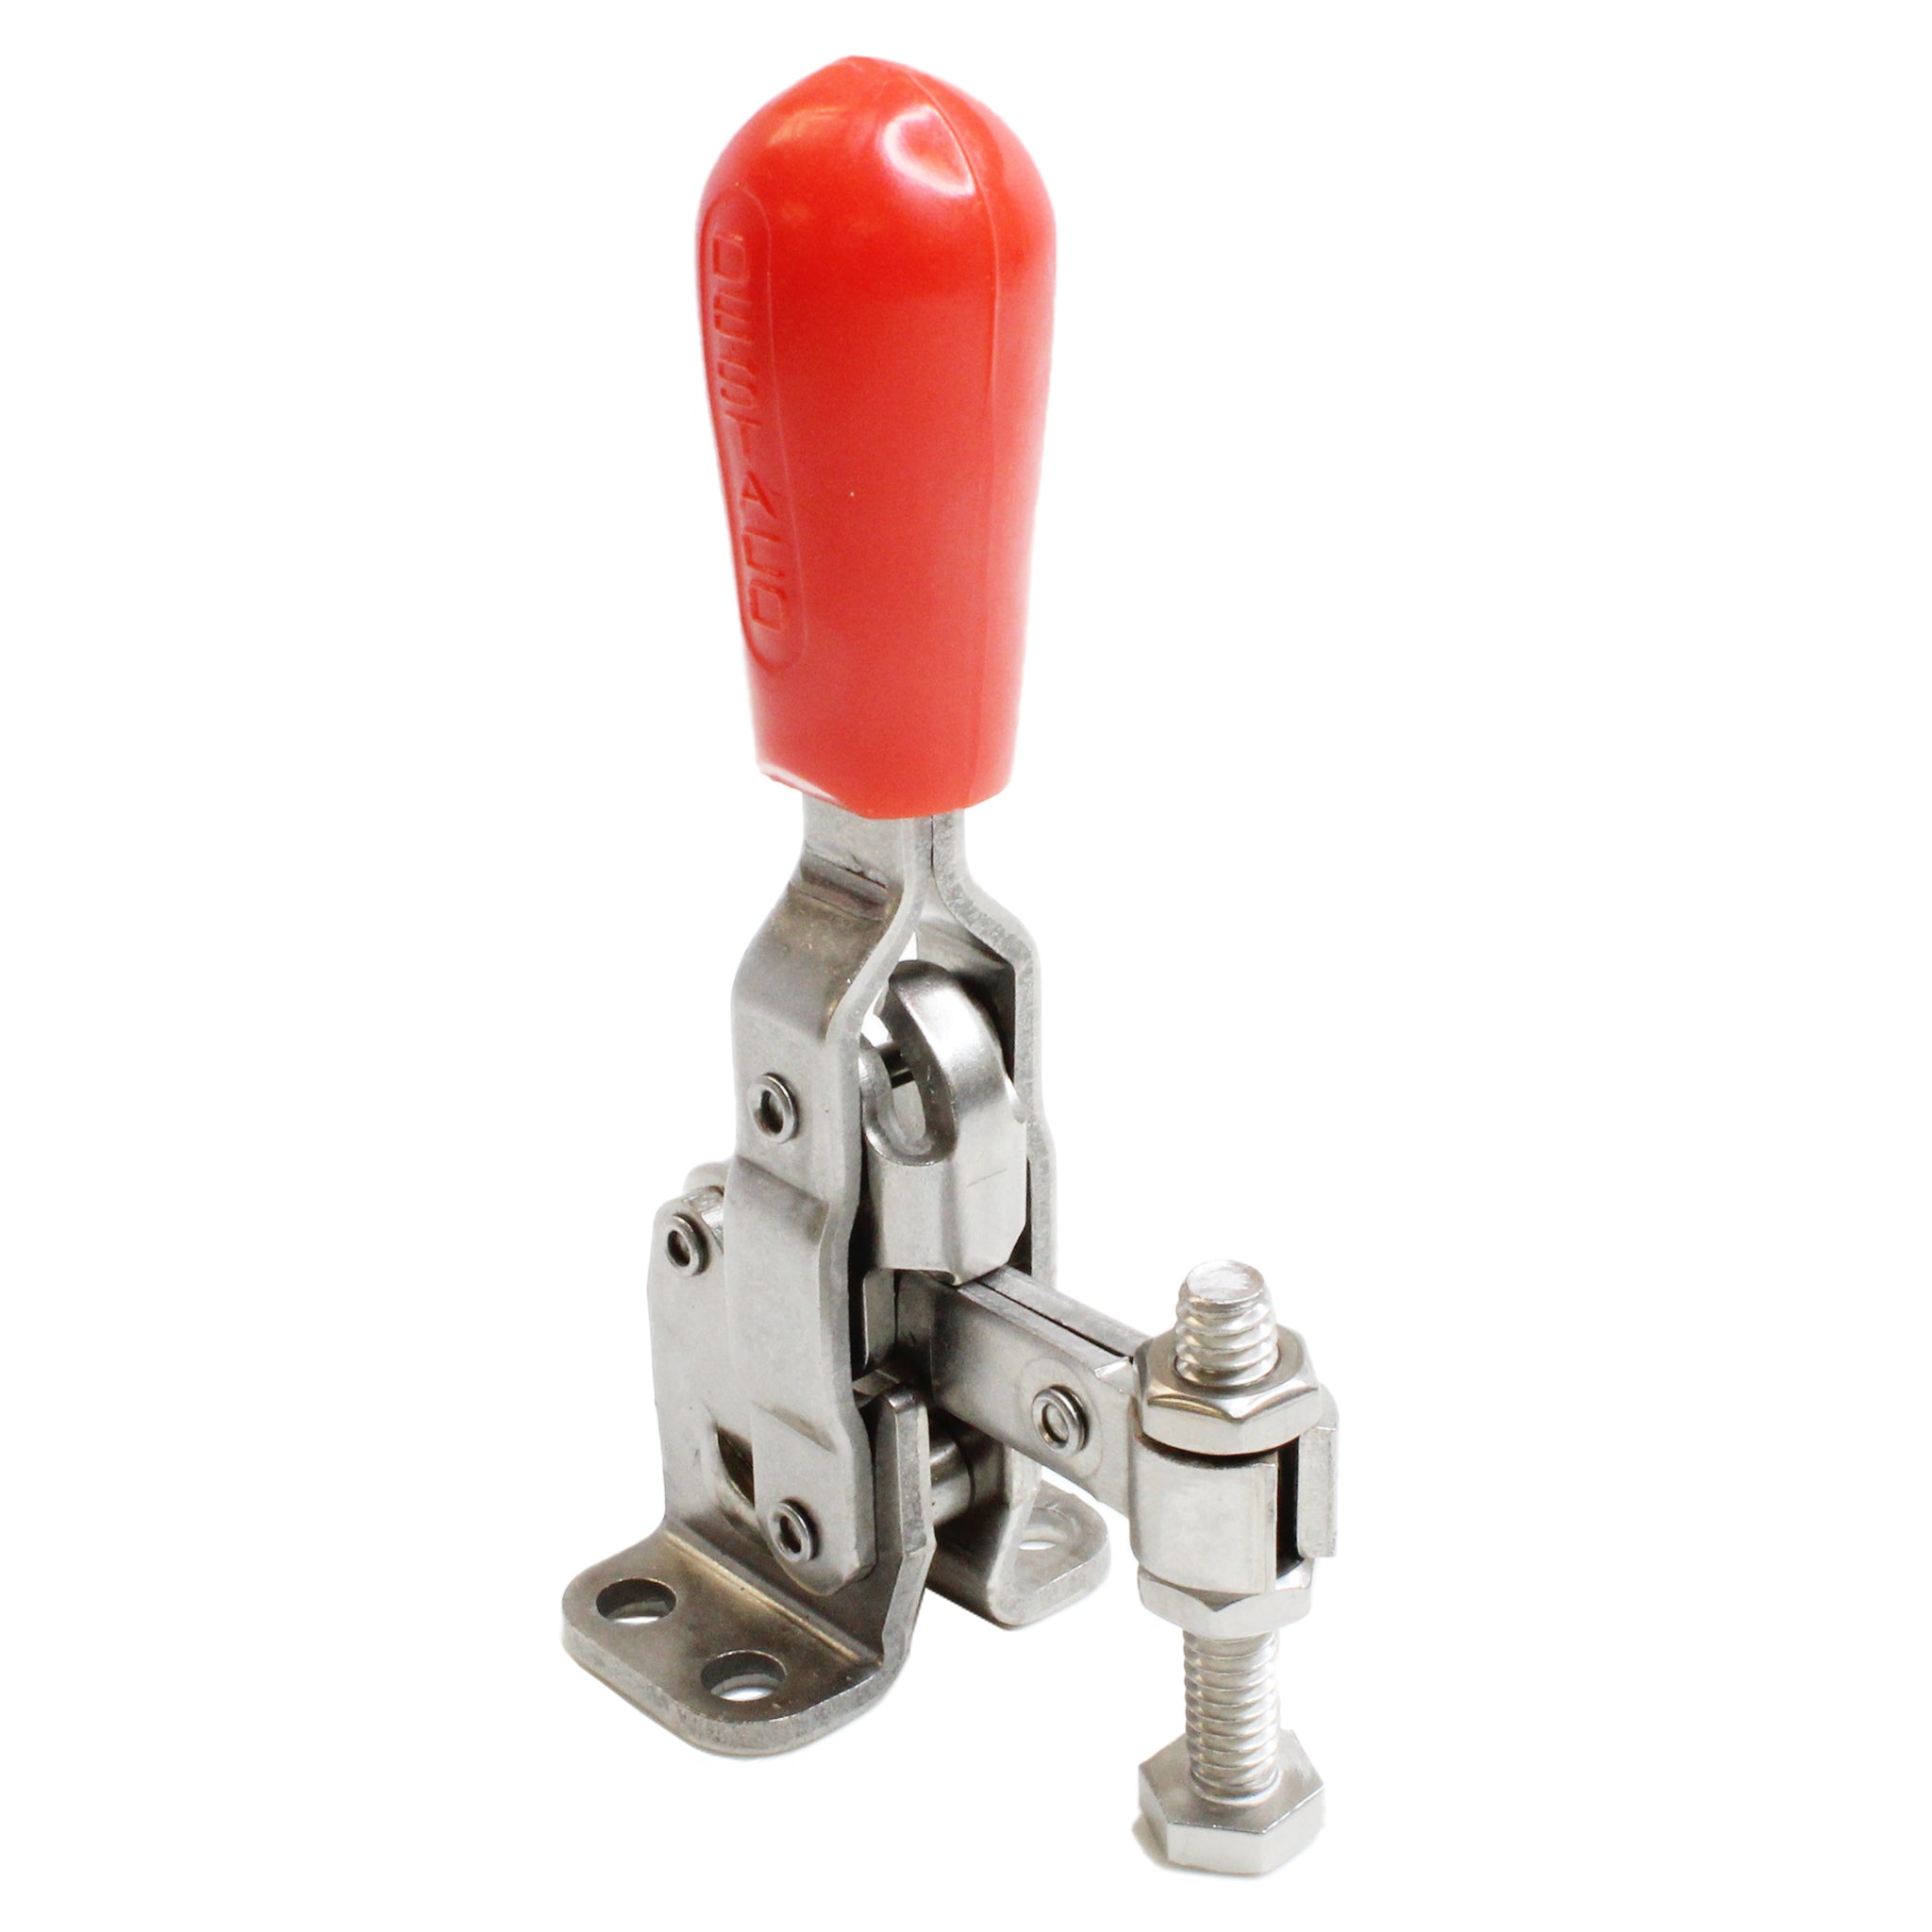 Destaco 202-SS | Vertical Hold-Down Toggle Locking Clamp